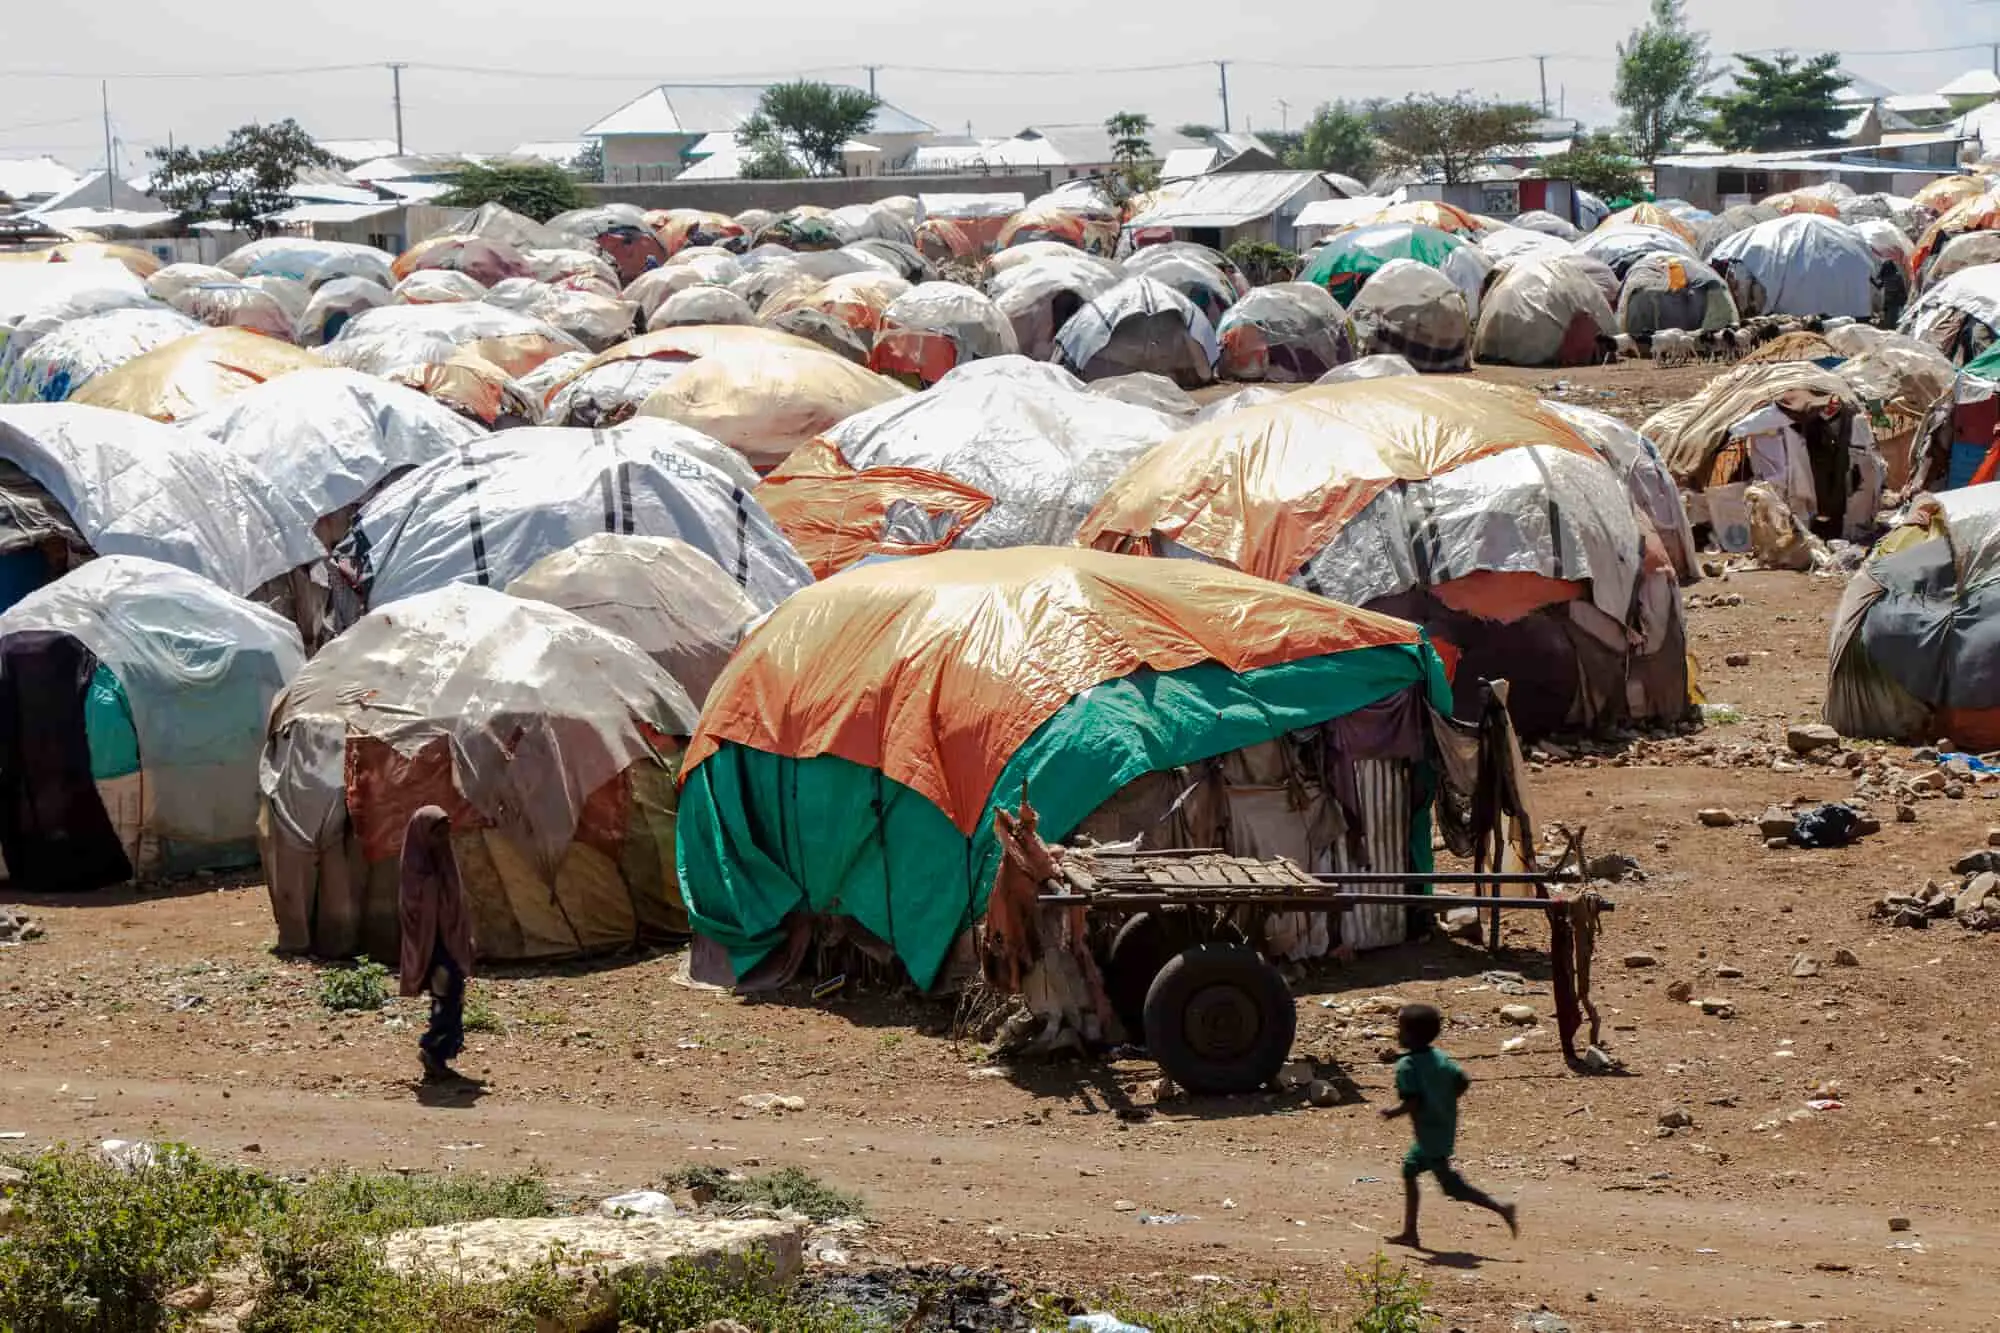 A camp for displaced people in Somalia